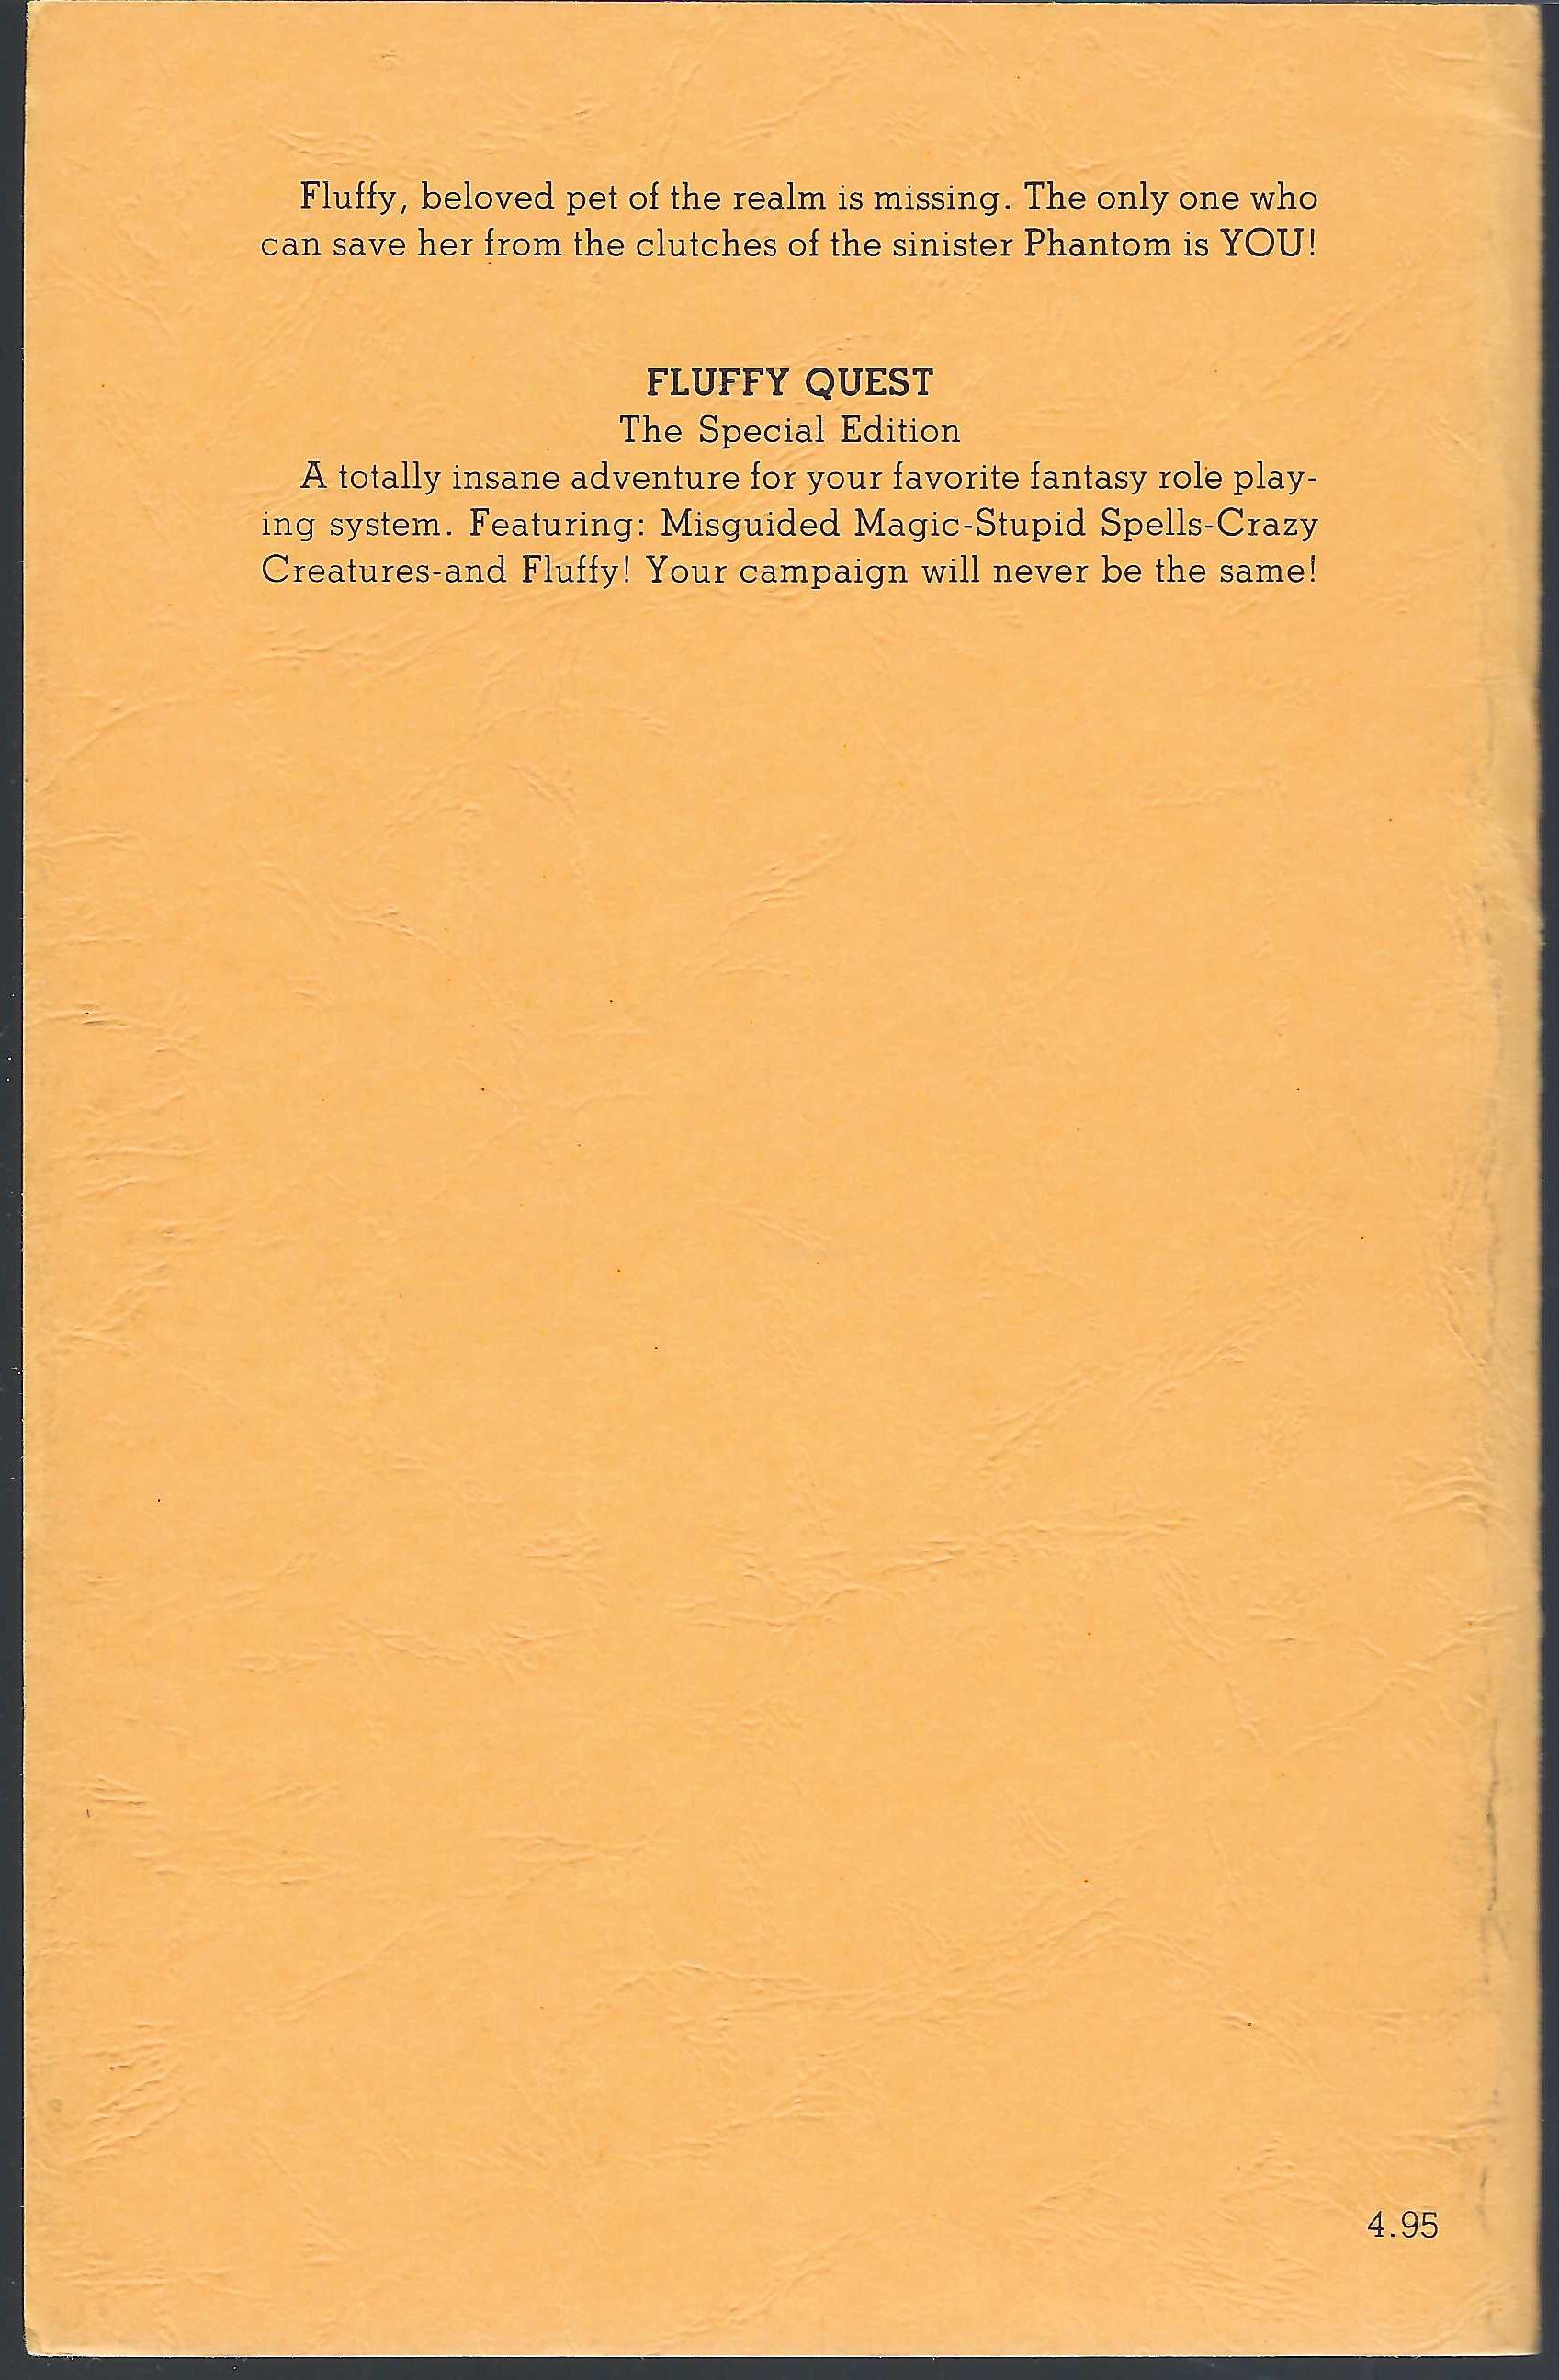 Fluffy Quest back cover